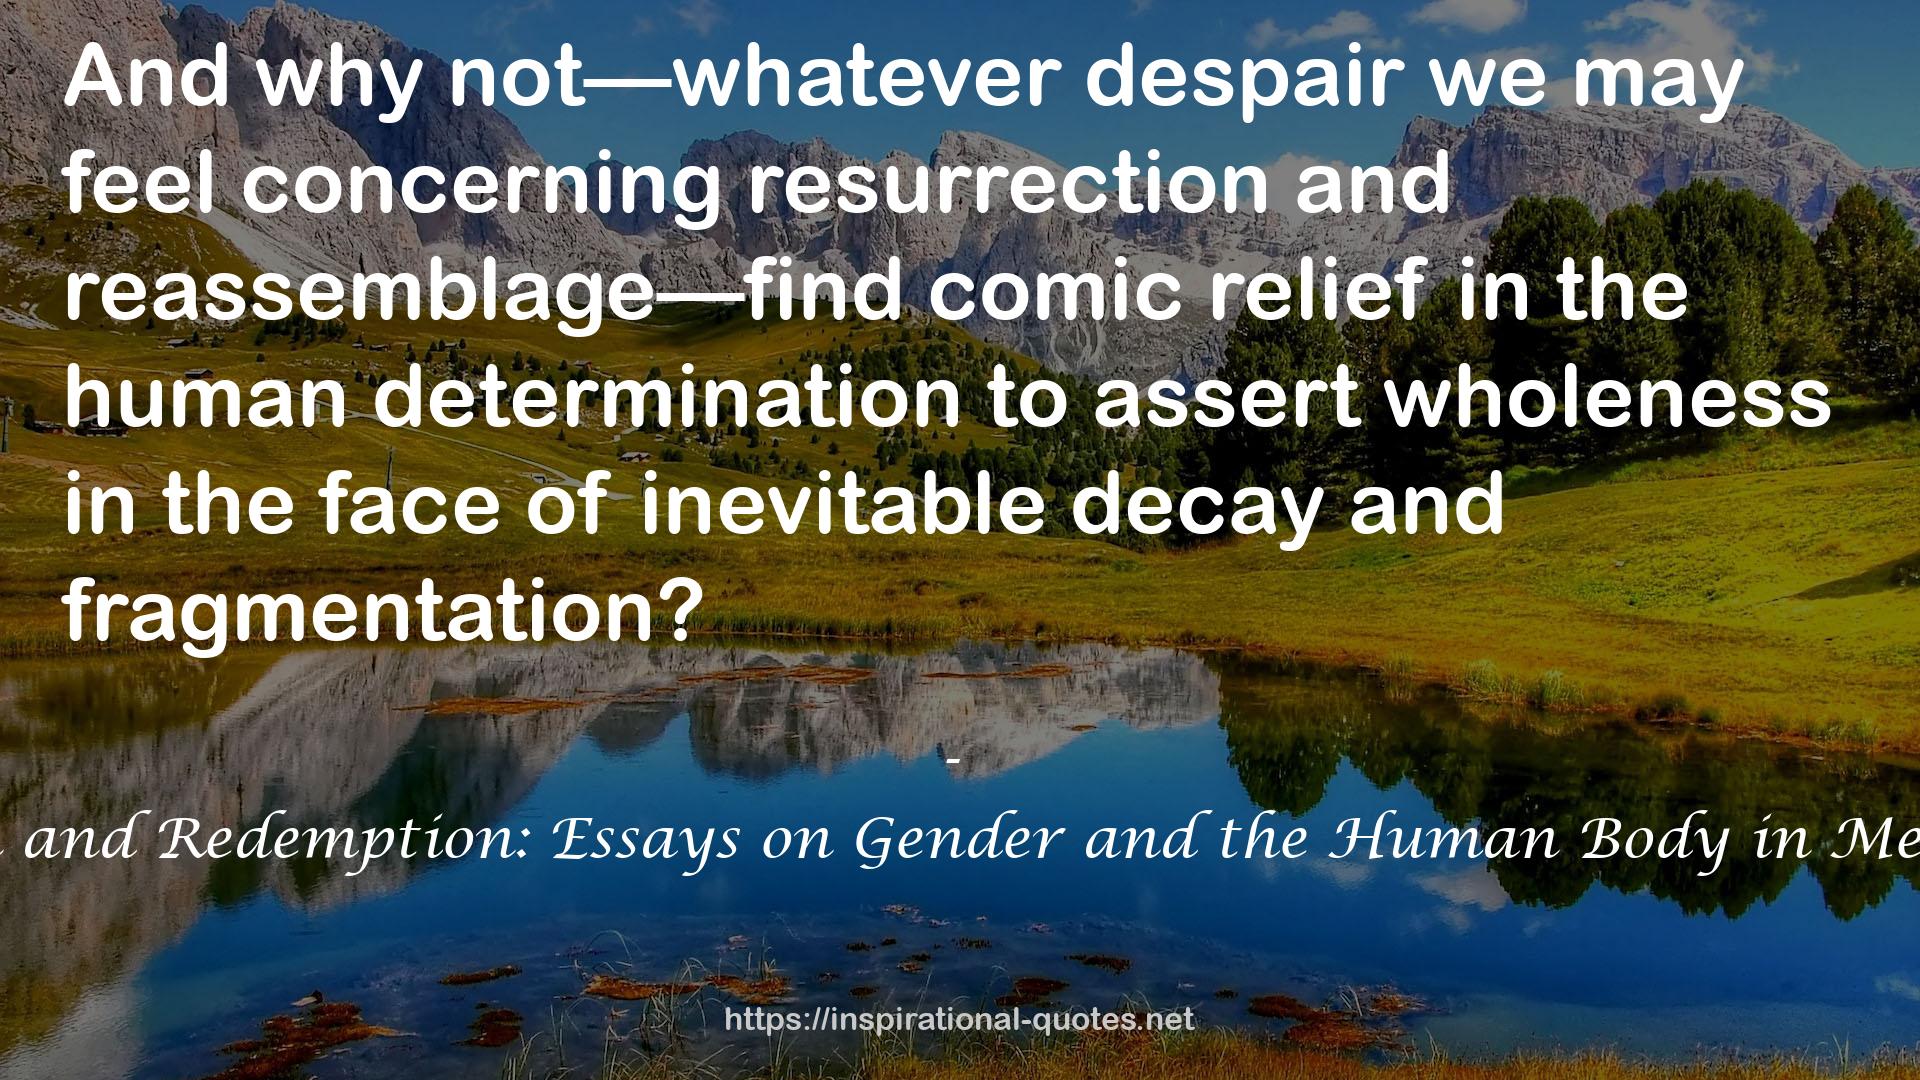 Fragmentation and Redemption: Essays on Gender and the Human Body in Medieval Religion QUOTES